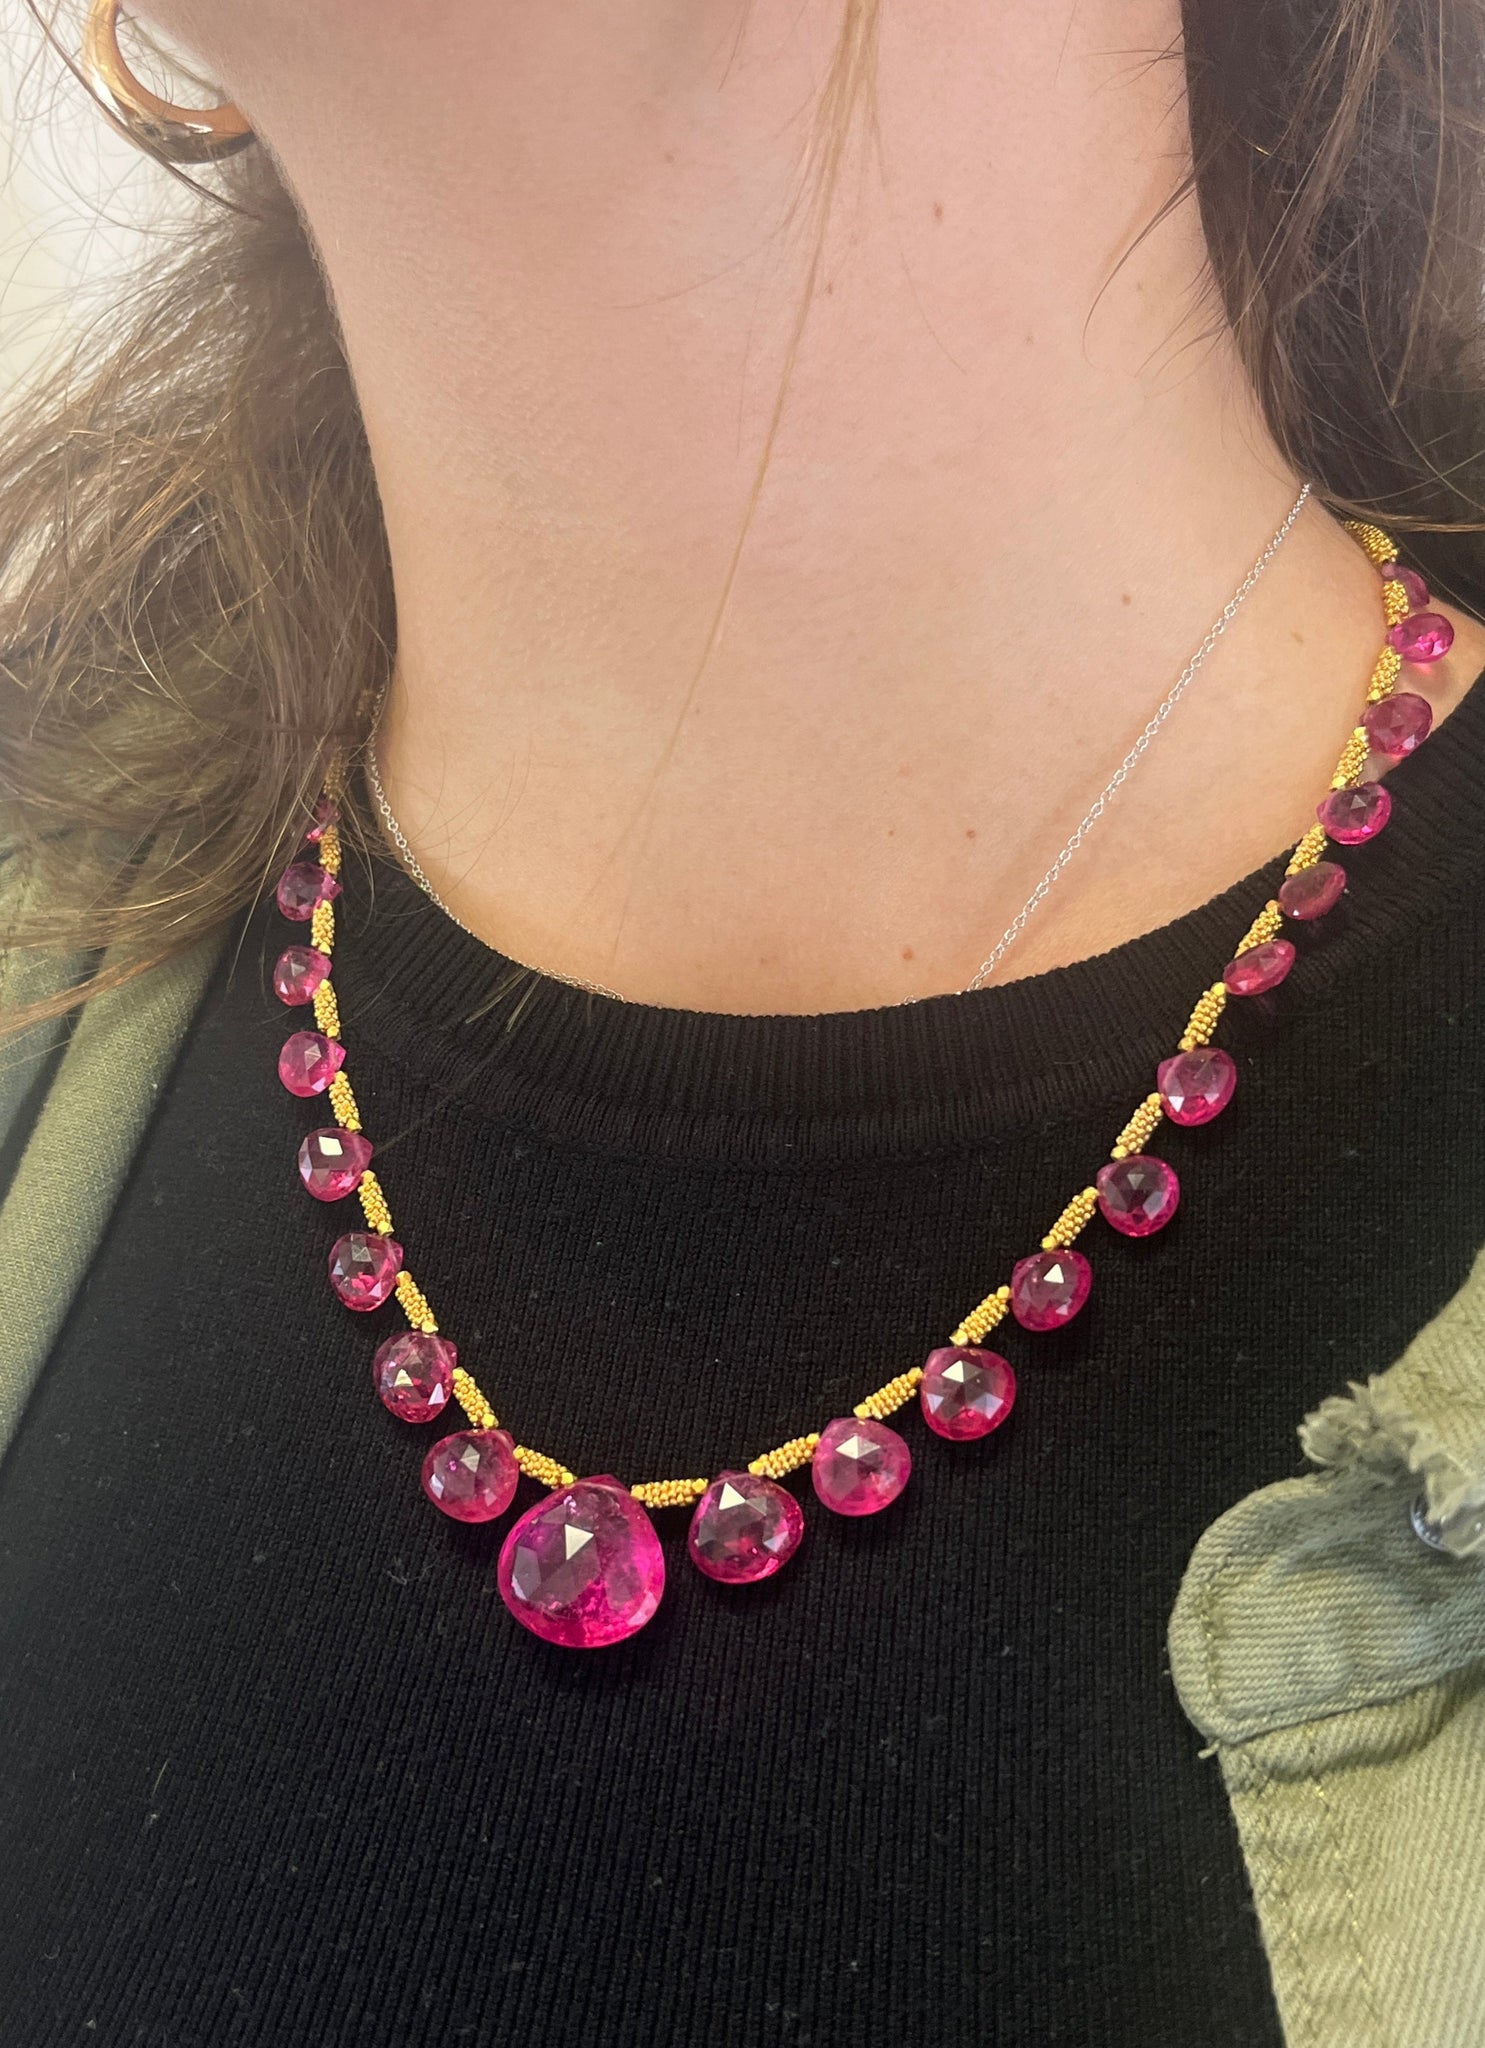 Vintage GIA Certified 120 Carat Pear-Shape Pink Rubellite Tourmaline Necklace in 22k Yellow Gold